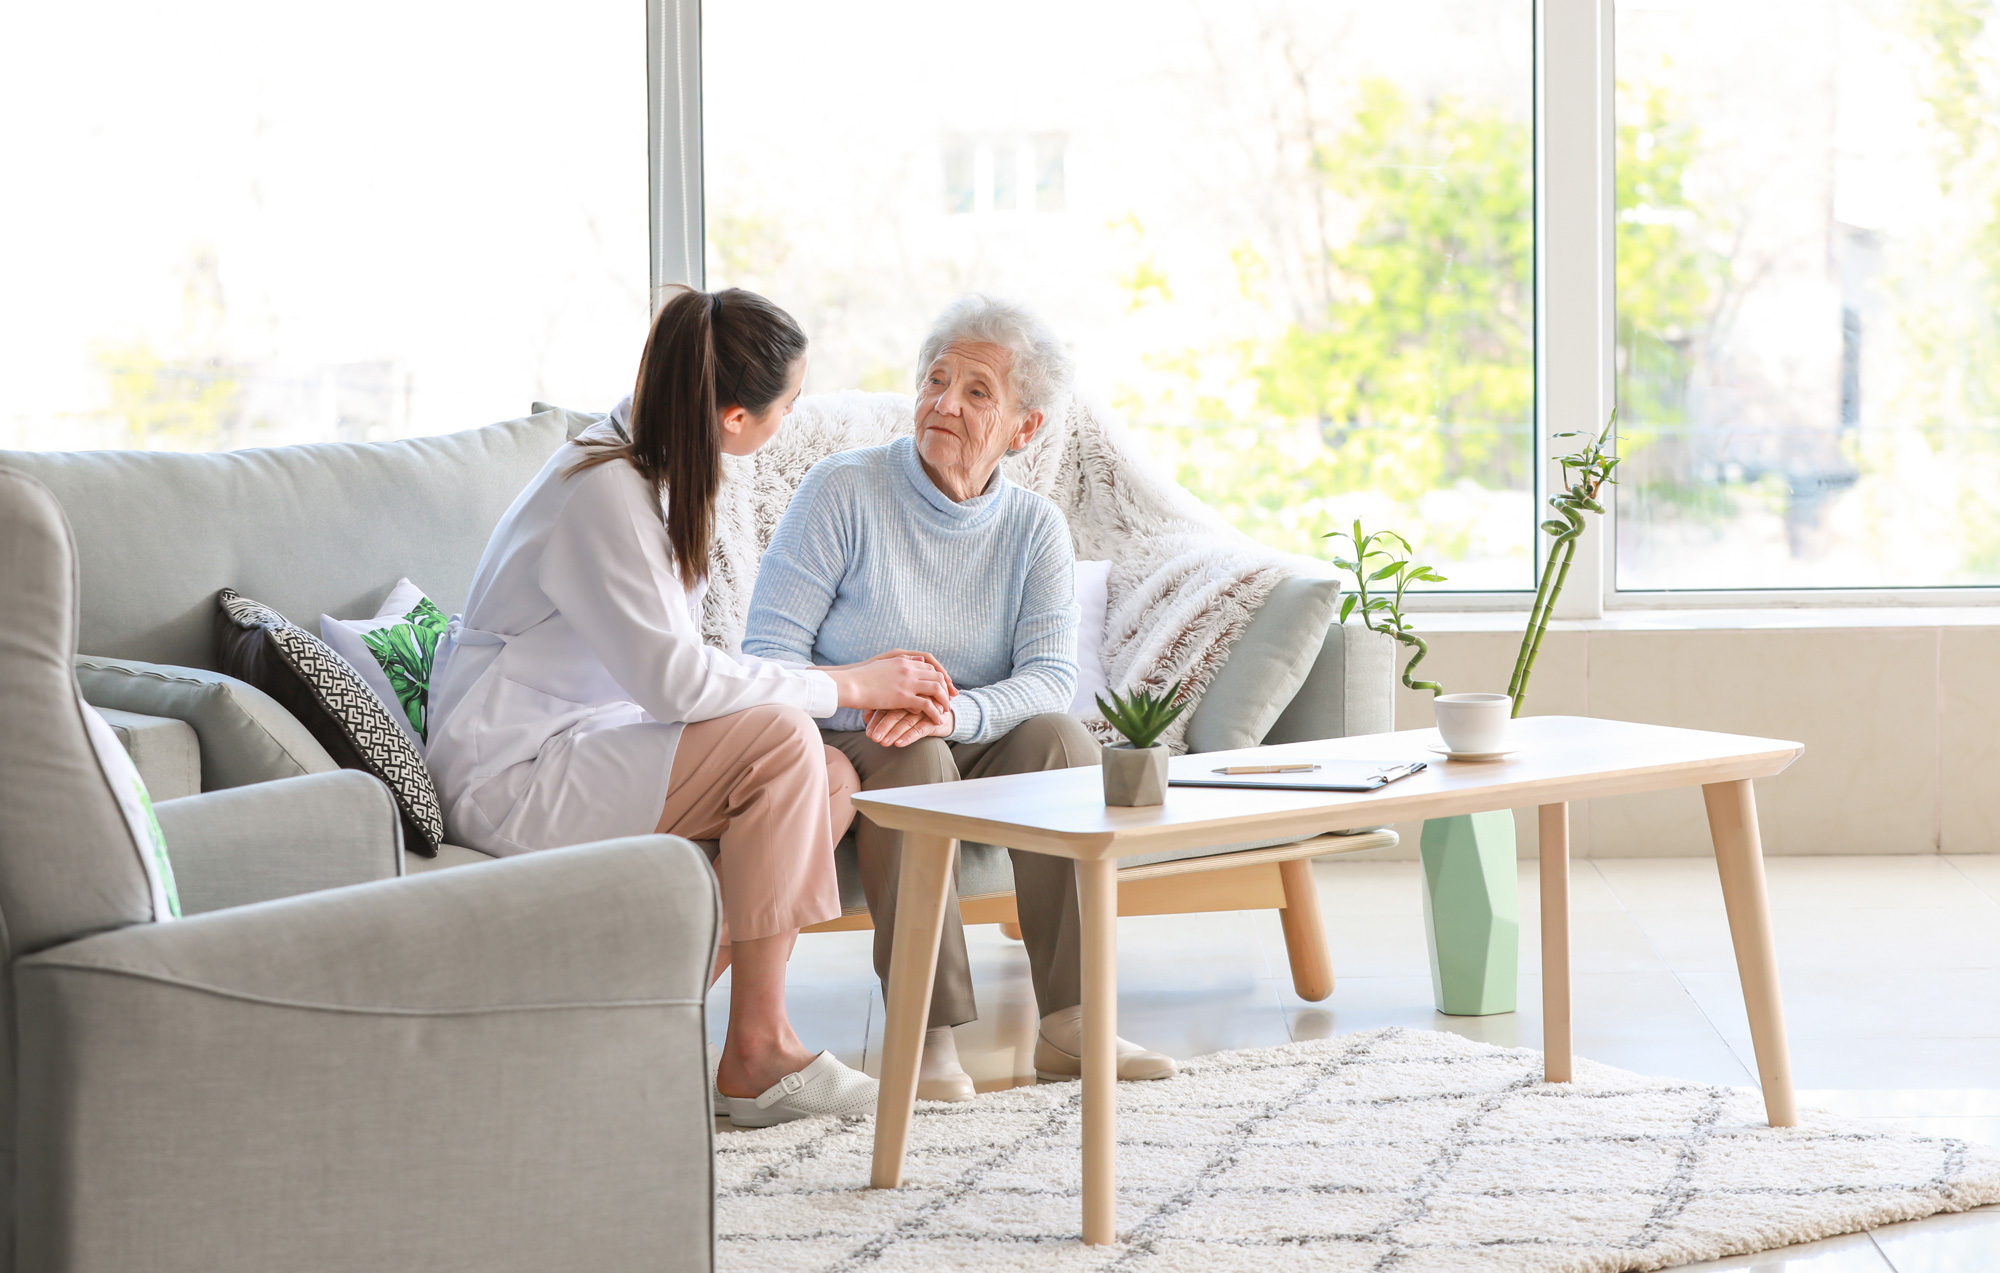 A live-in carer, in a bright, airy room, sat on a grey sofa with her client, comforting her. Live-in Care with Aster Care is an affordable alternative to nursing home care.